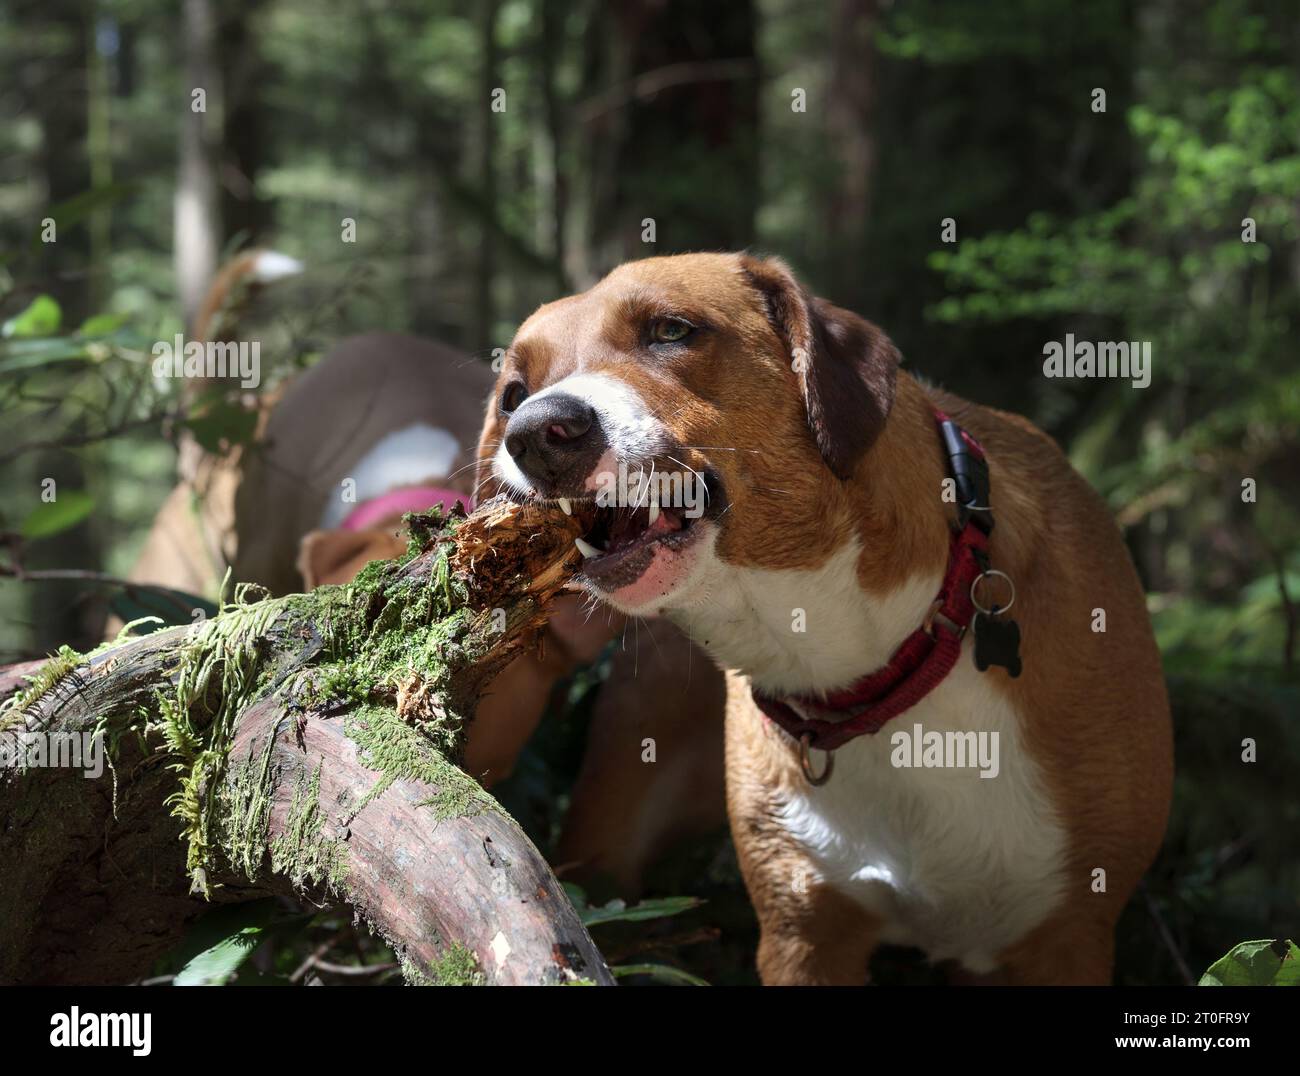 Dog eating wood on walk in forest. Puppy dog chewing tree branch or twig with moss with teeth visible. Dog wood eating obsession or fixation. 1 year o Stock Photo